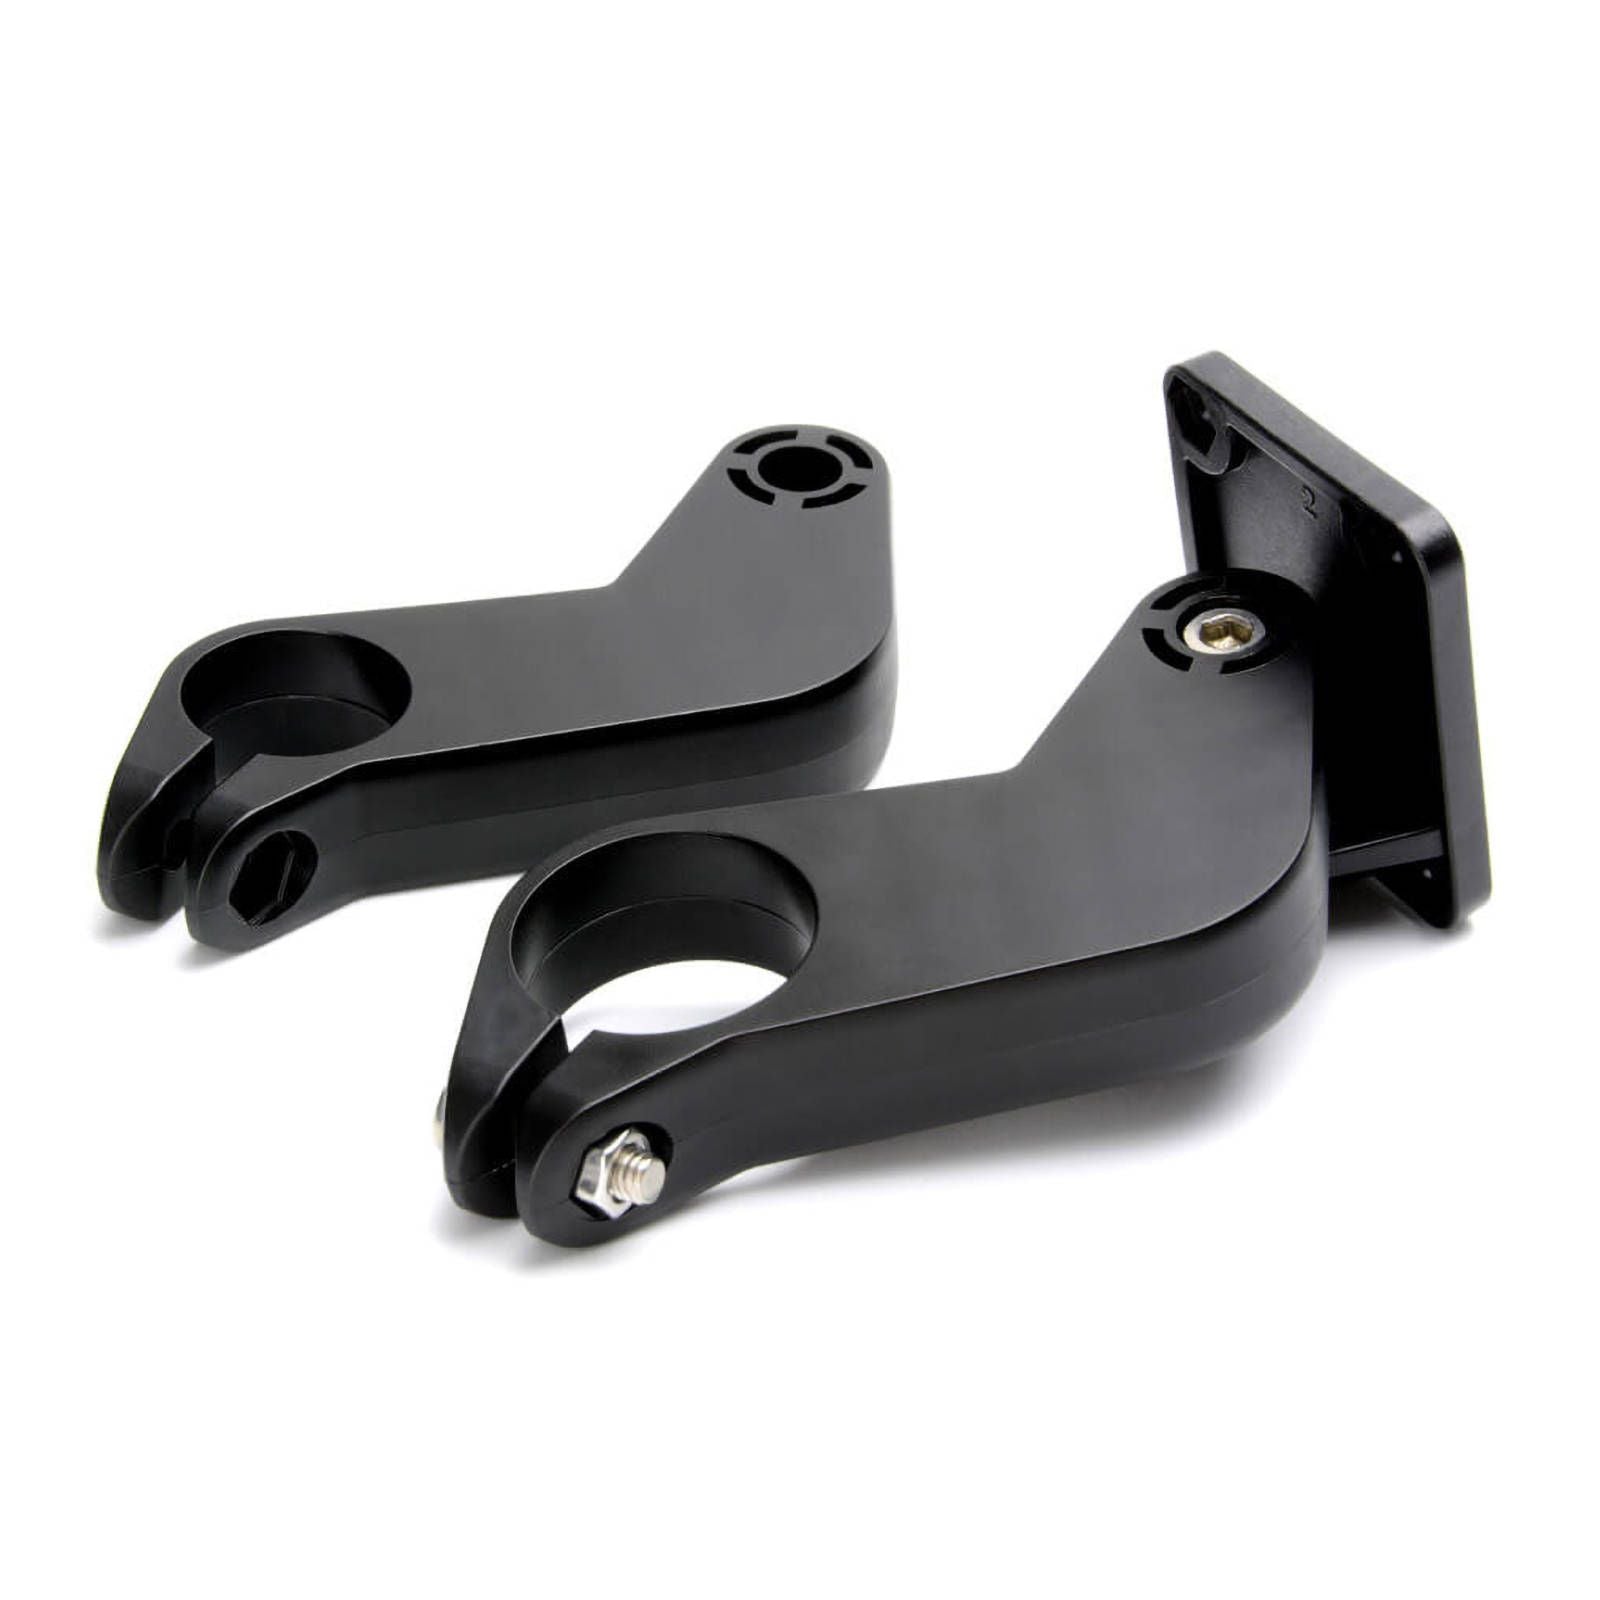 New TRAIL TECH Voyager Pro Bar Clamps #TT92001000